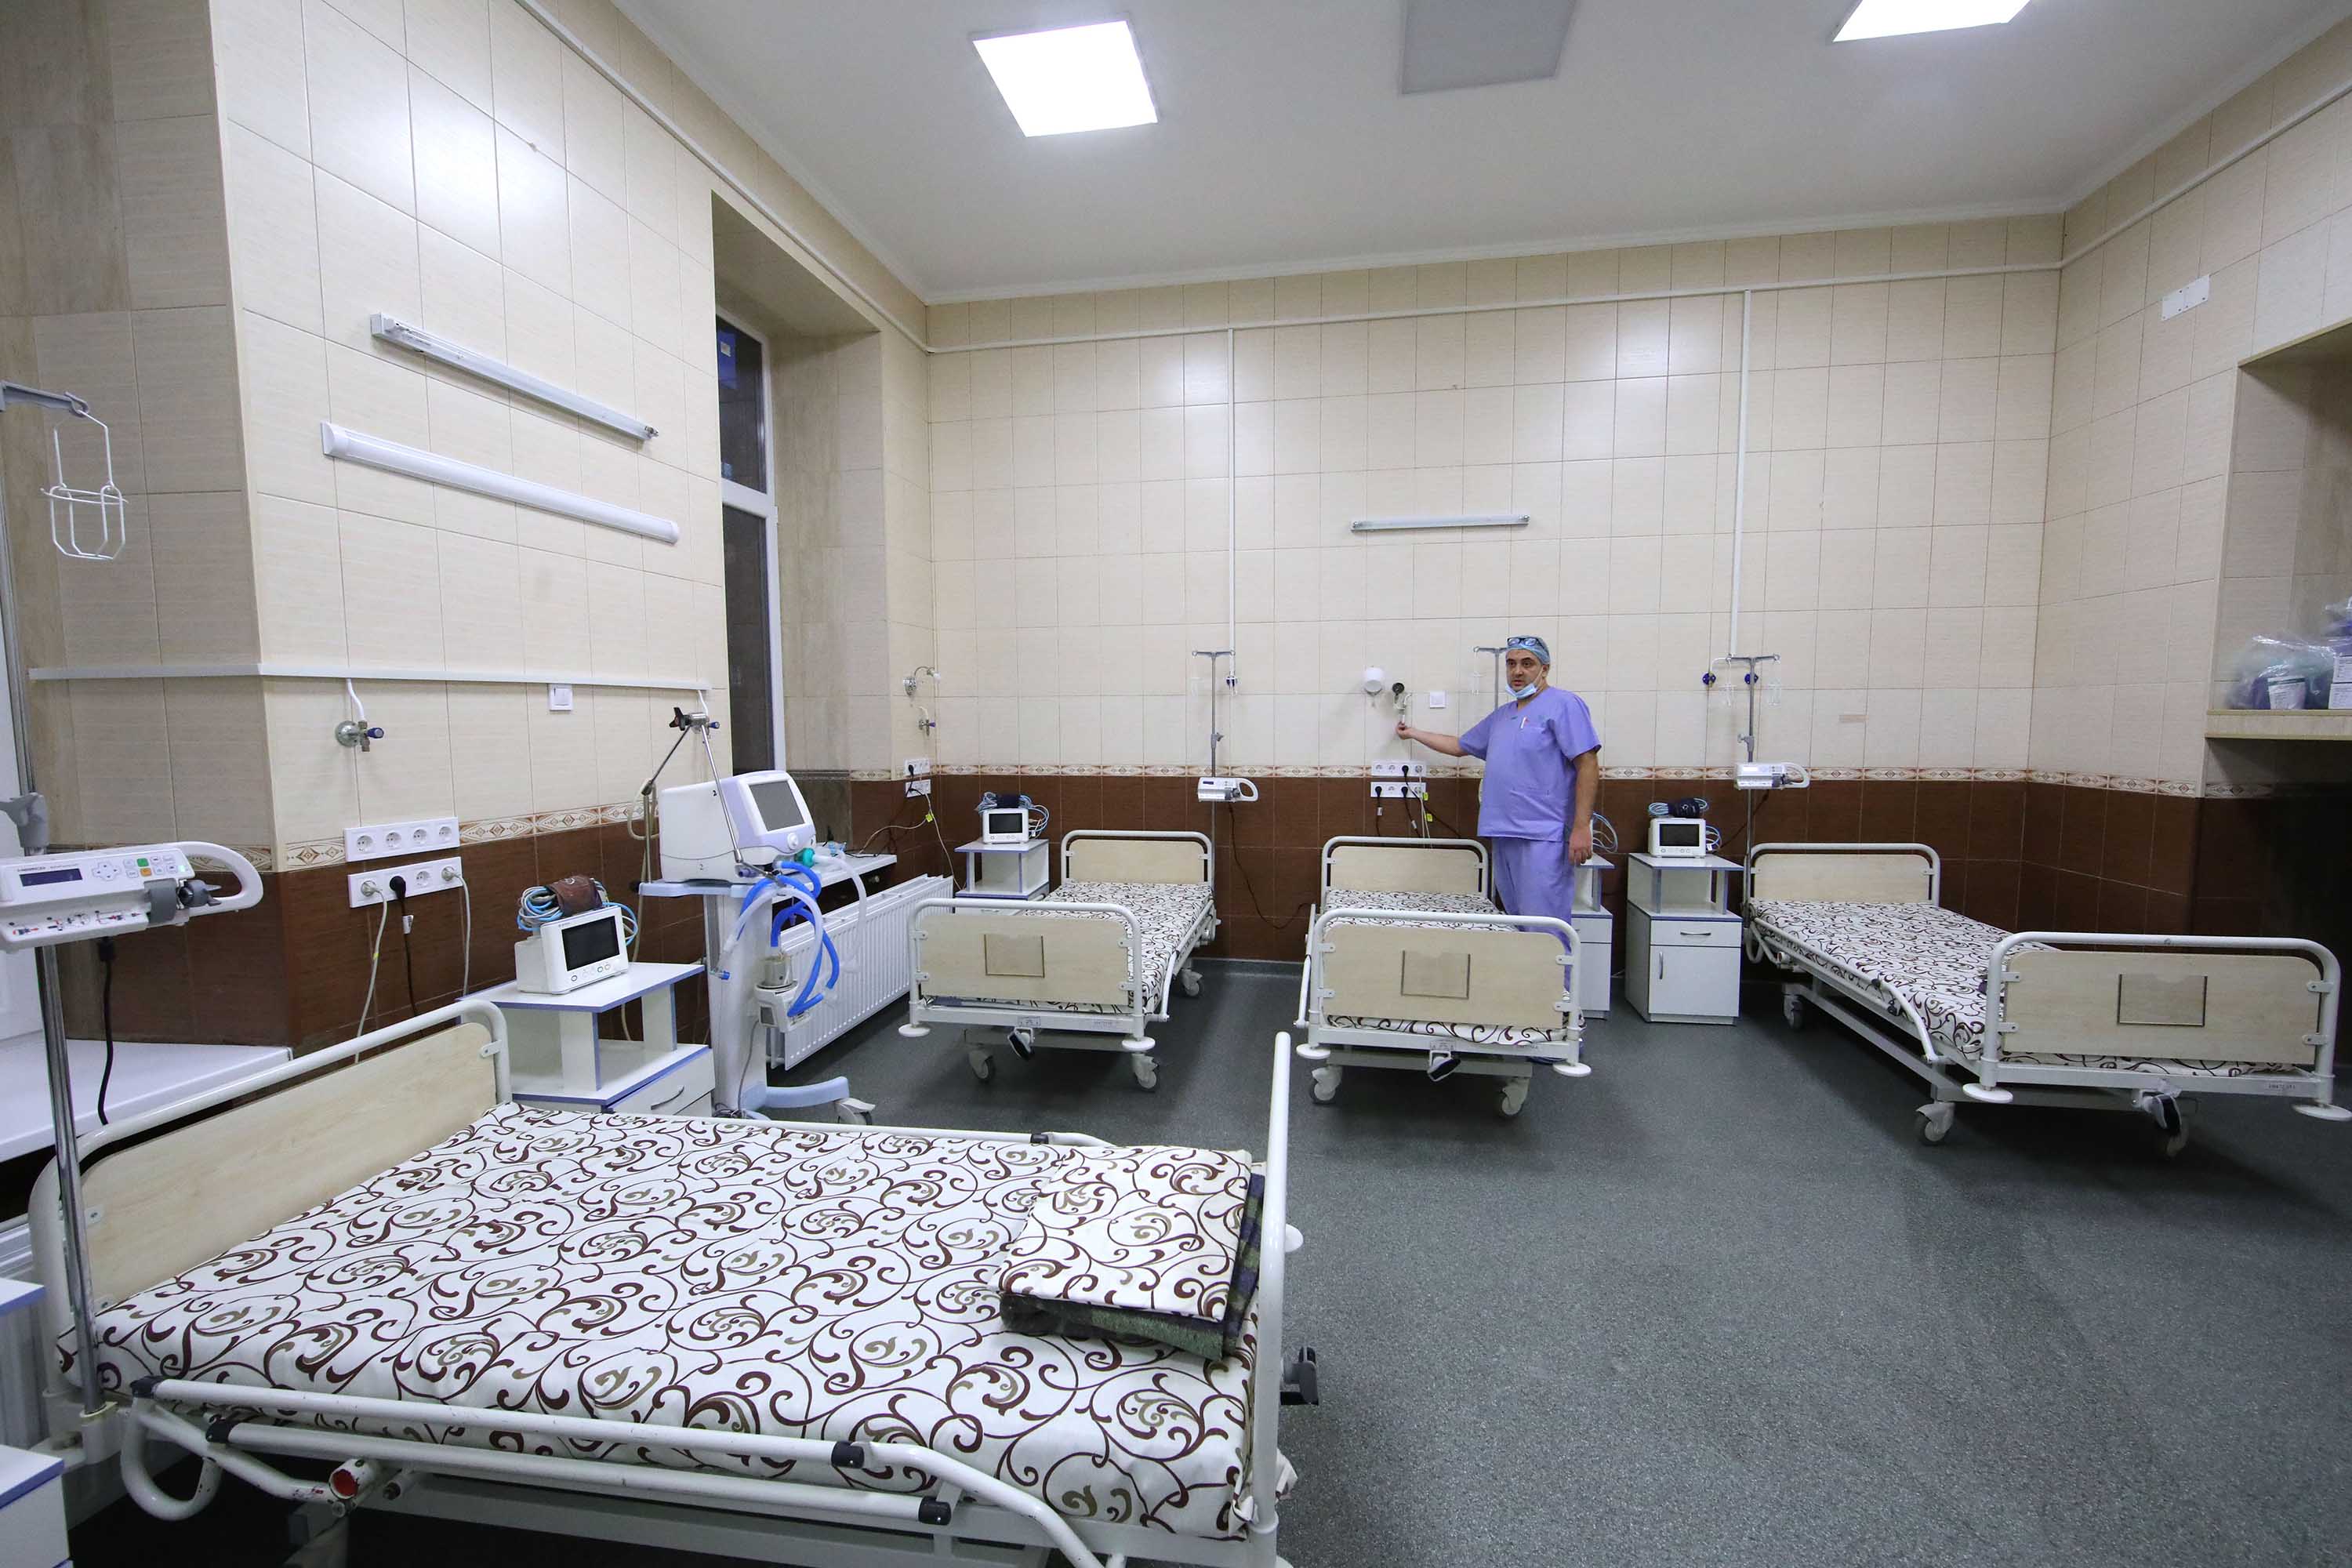 A healthcare worker checks equipment in the new ward for Covid-19 patients at the Kharkiv Regional Clinical Hospital in Kharkiv, Ukraine, on November 30.